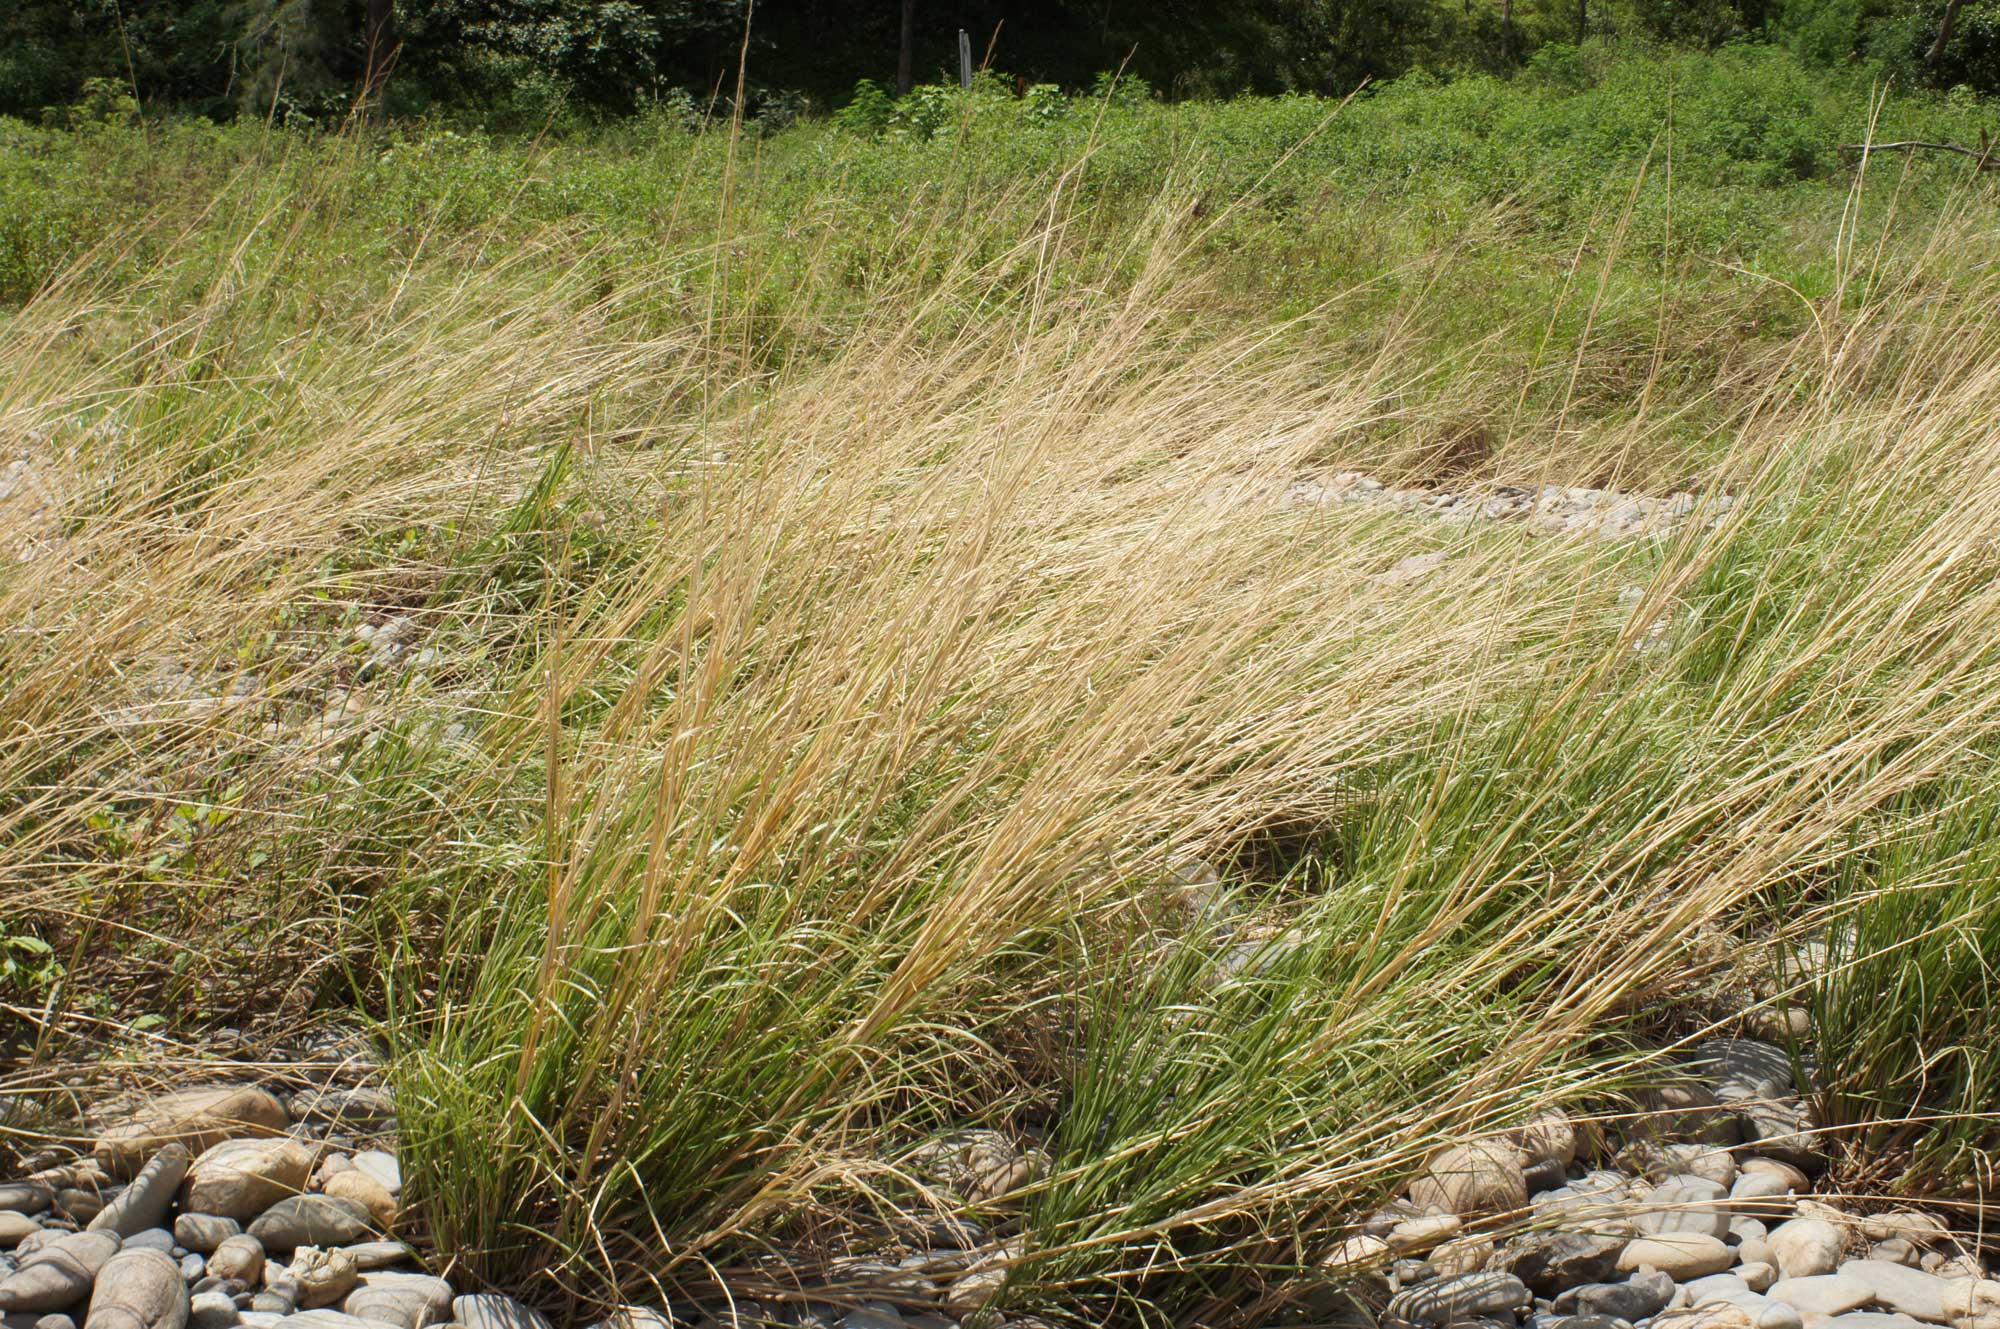 Photograph of Chrysopogon filipes growing in the Macleay River, Australia. The photo shows a dry riverbed with large cobbles and clumps of grass growing in it. The grass is a mix of green and yellow dried stalks. The grass clumps are leaning toward the right side of the image.